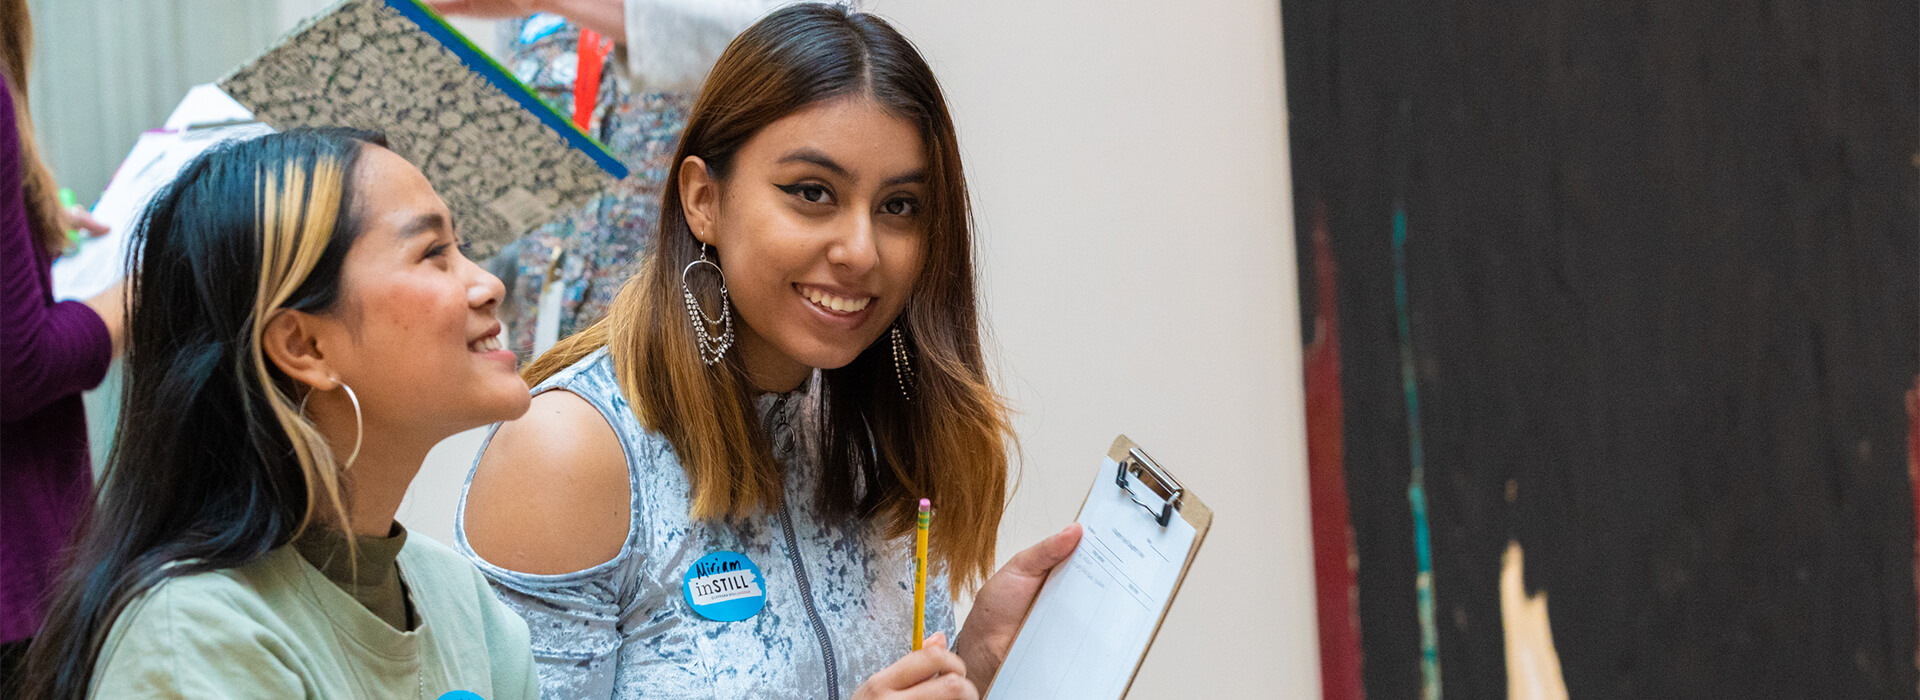 One teen girl holds a clipboard and smiles while another smiles and looks up in an art gallery